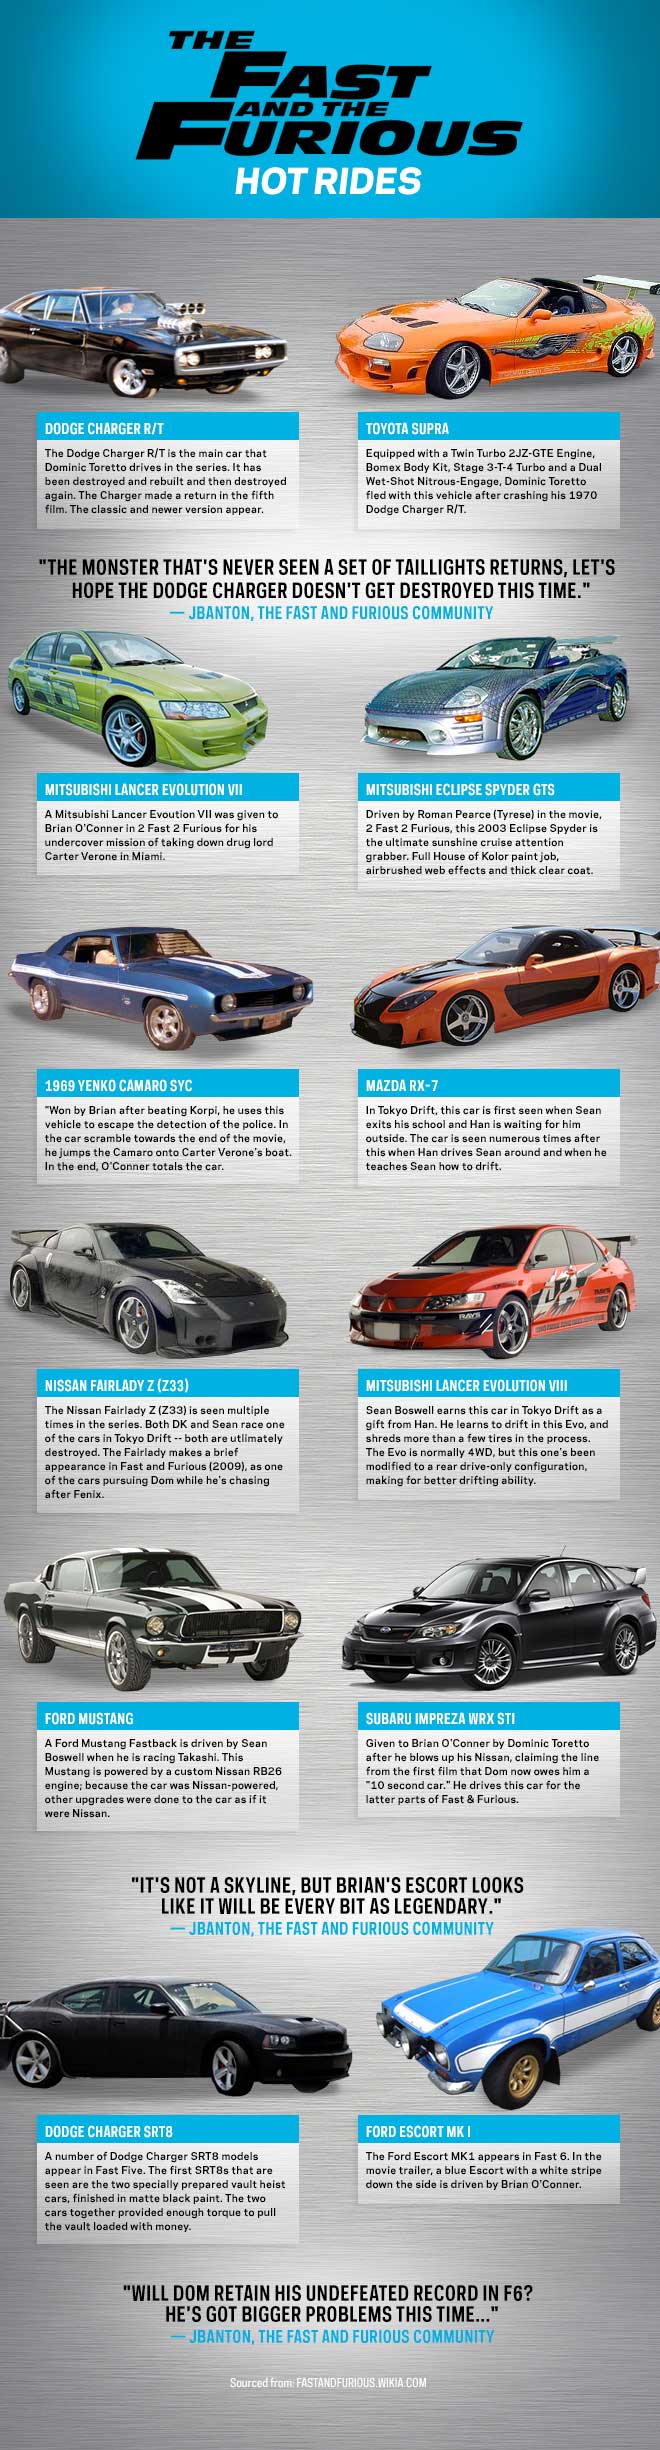 FastFurious CharacterTree R1-1